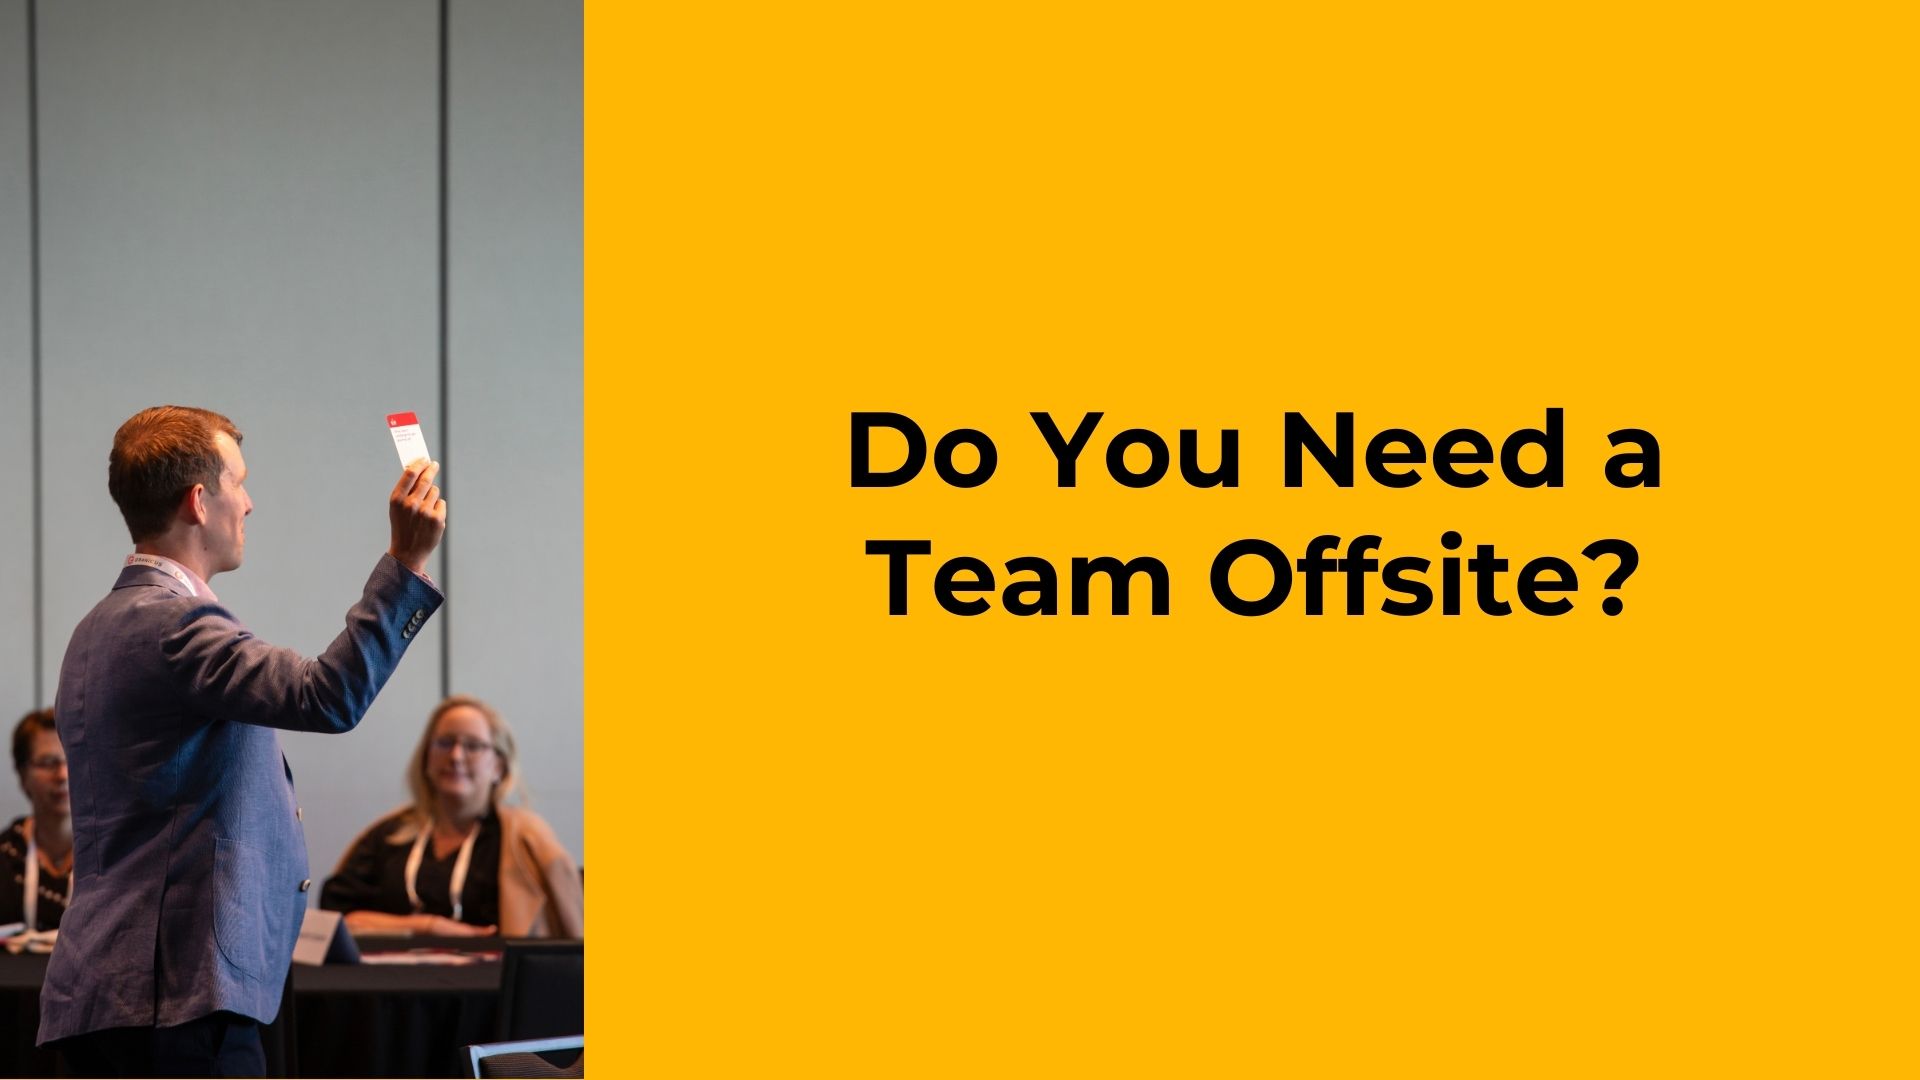 Do you need a team offsite? 3 prompts to consider